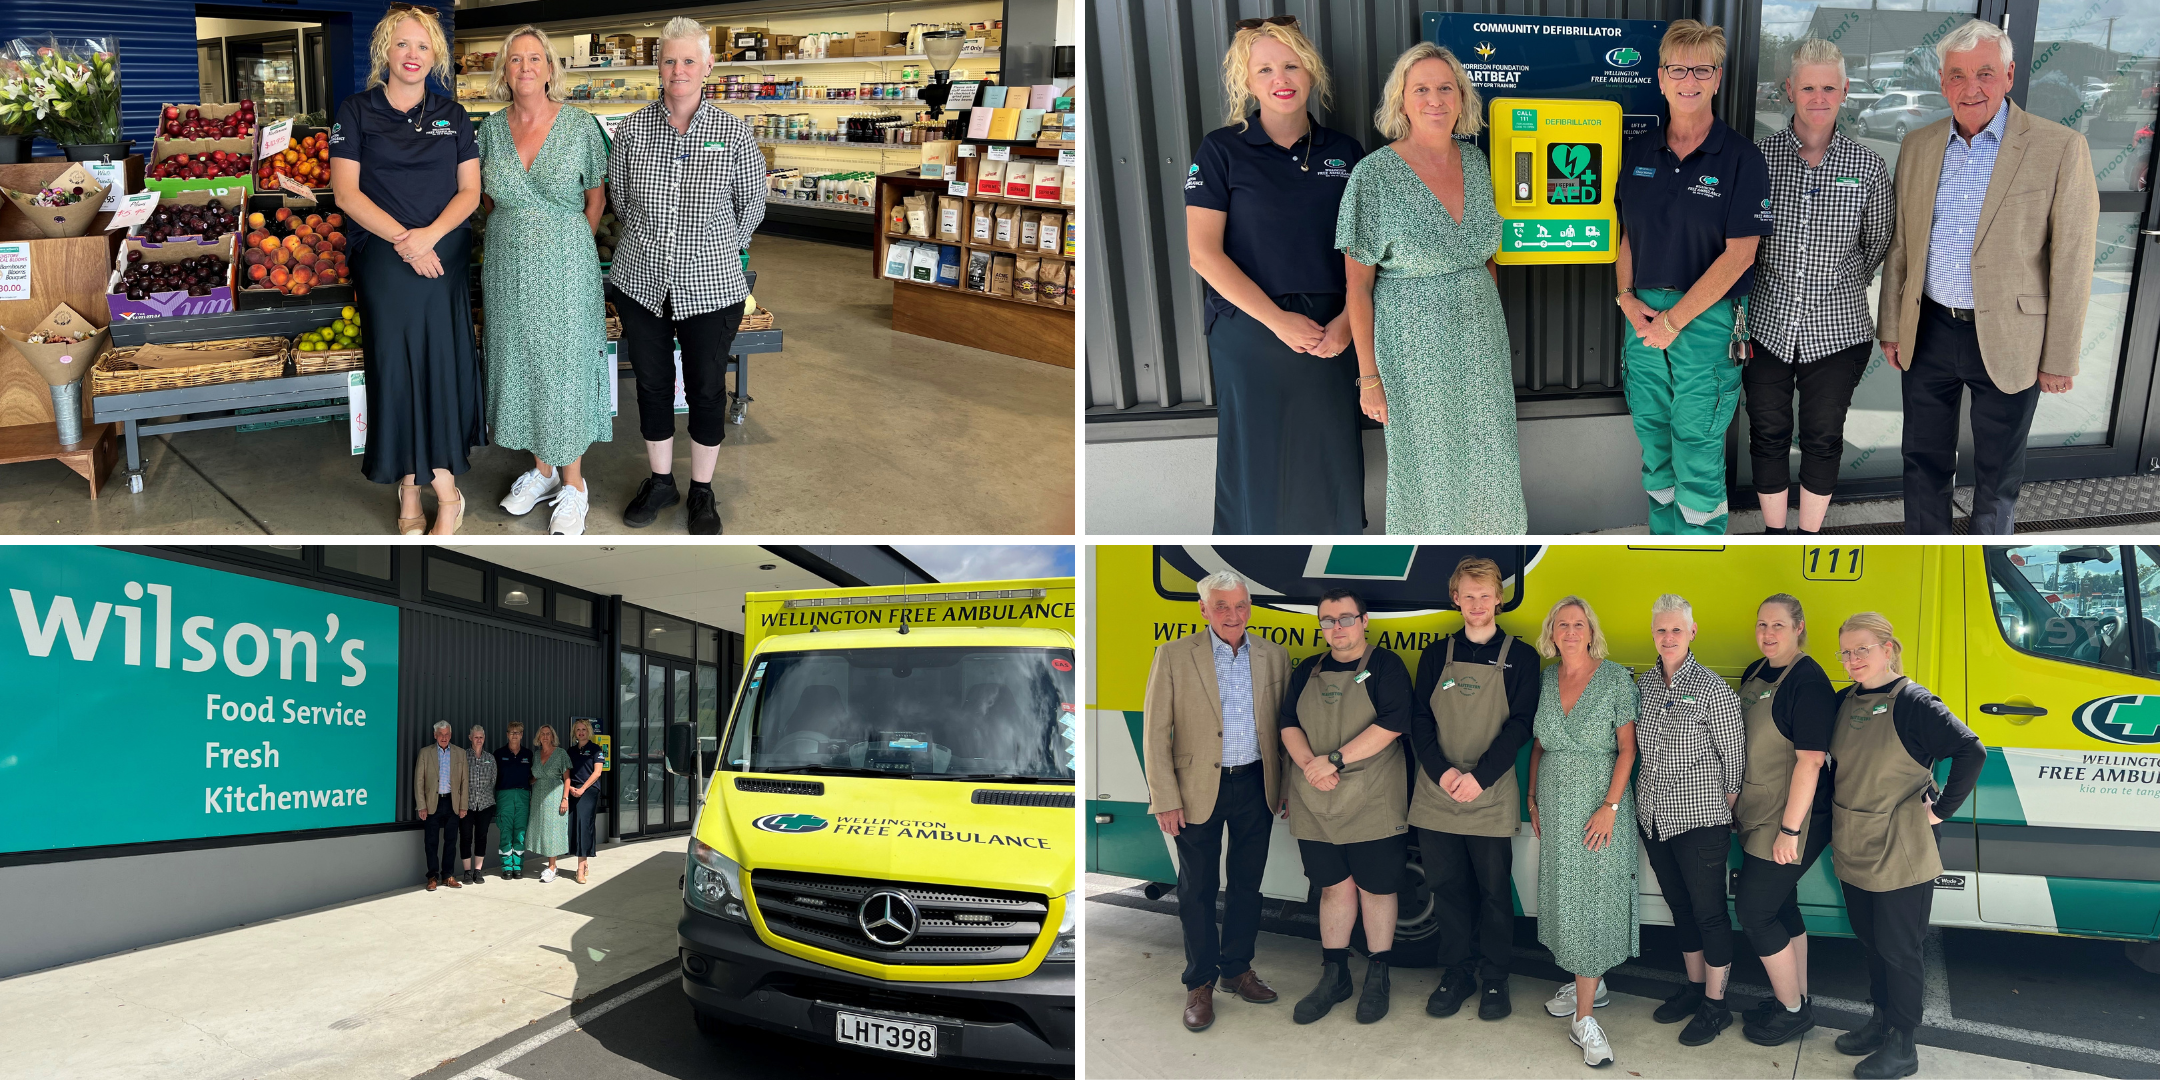 4 small images showing Moore Wilson's and WFA staff in front of an ambulance and with an AED